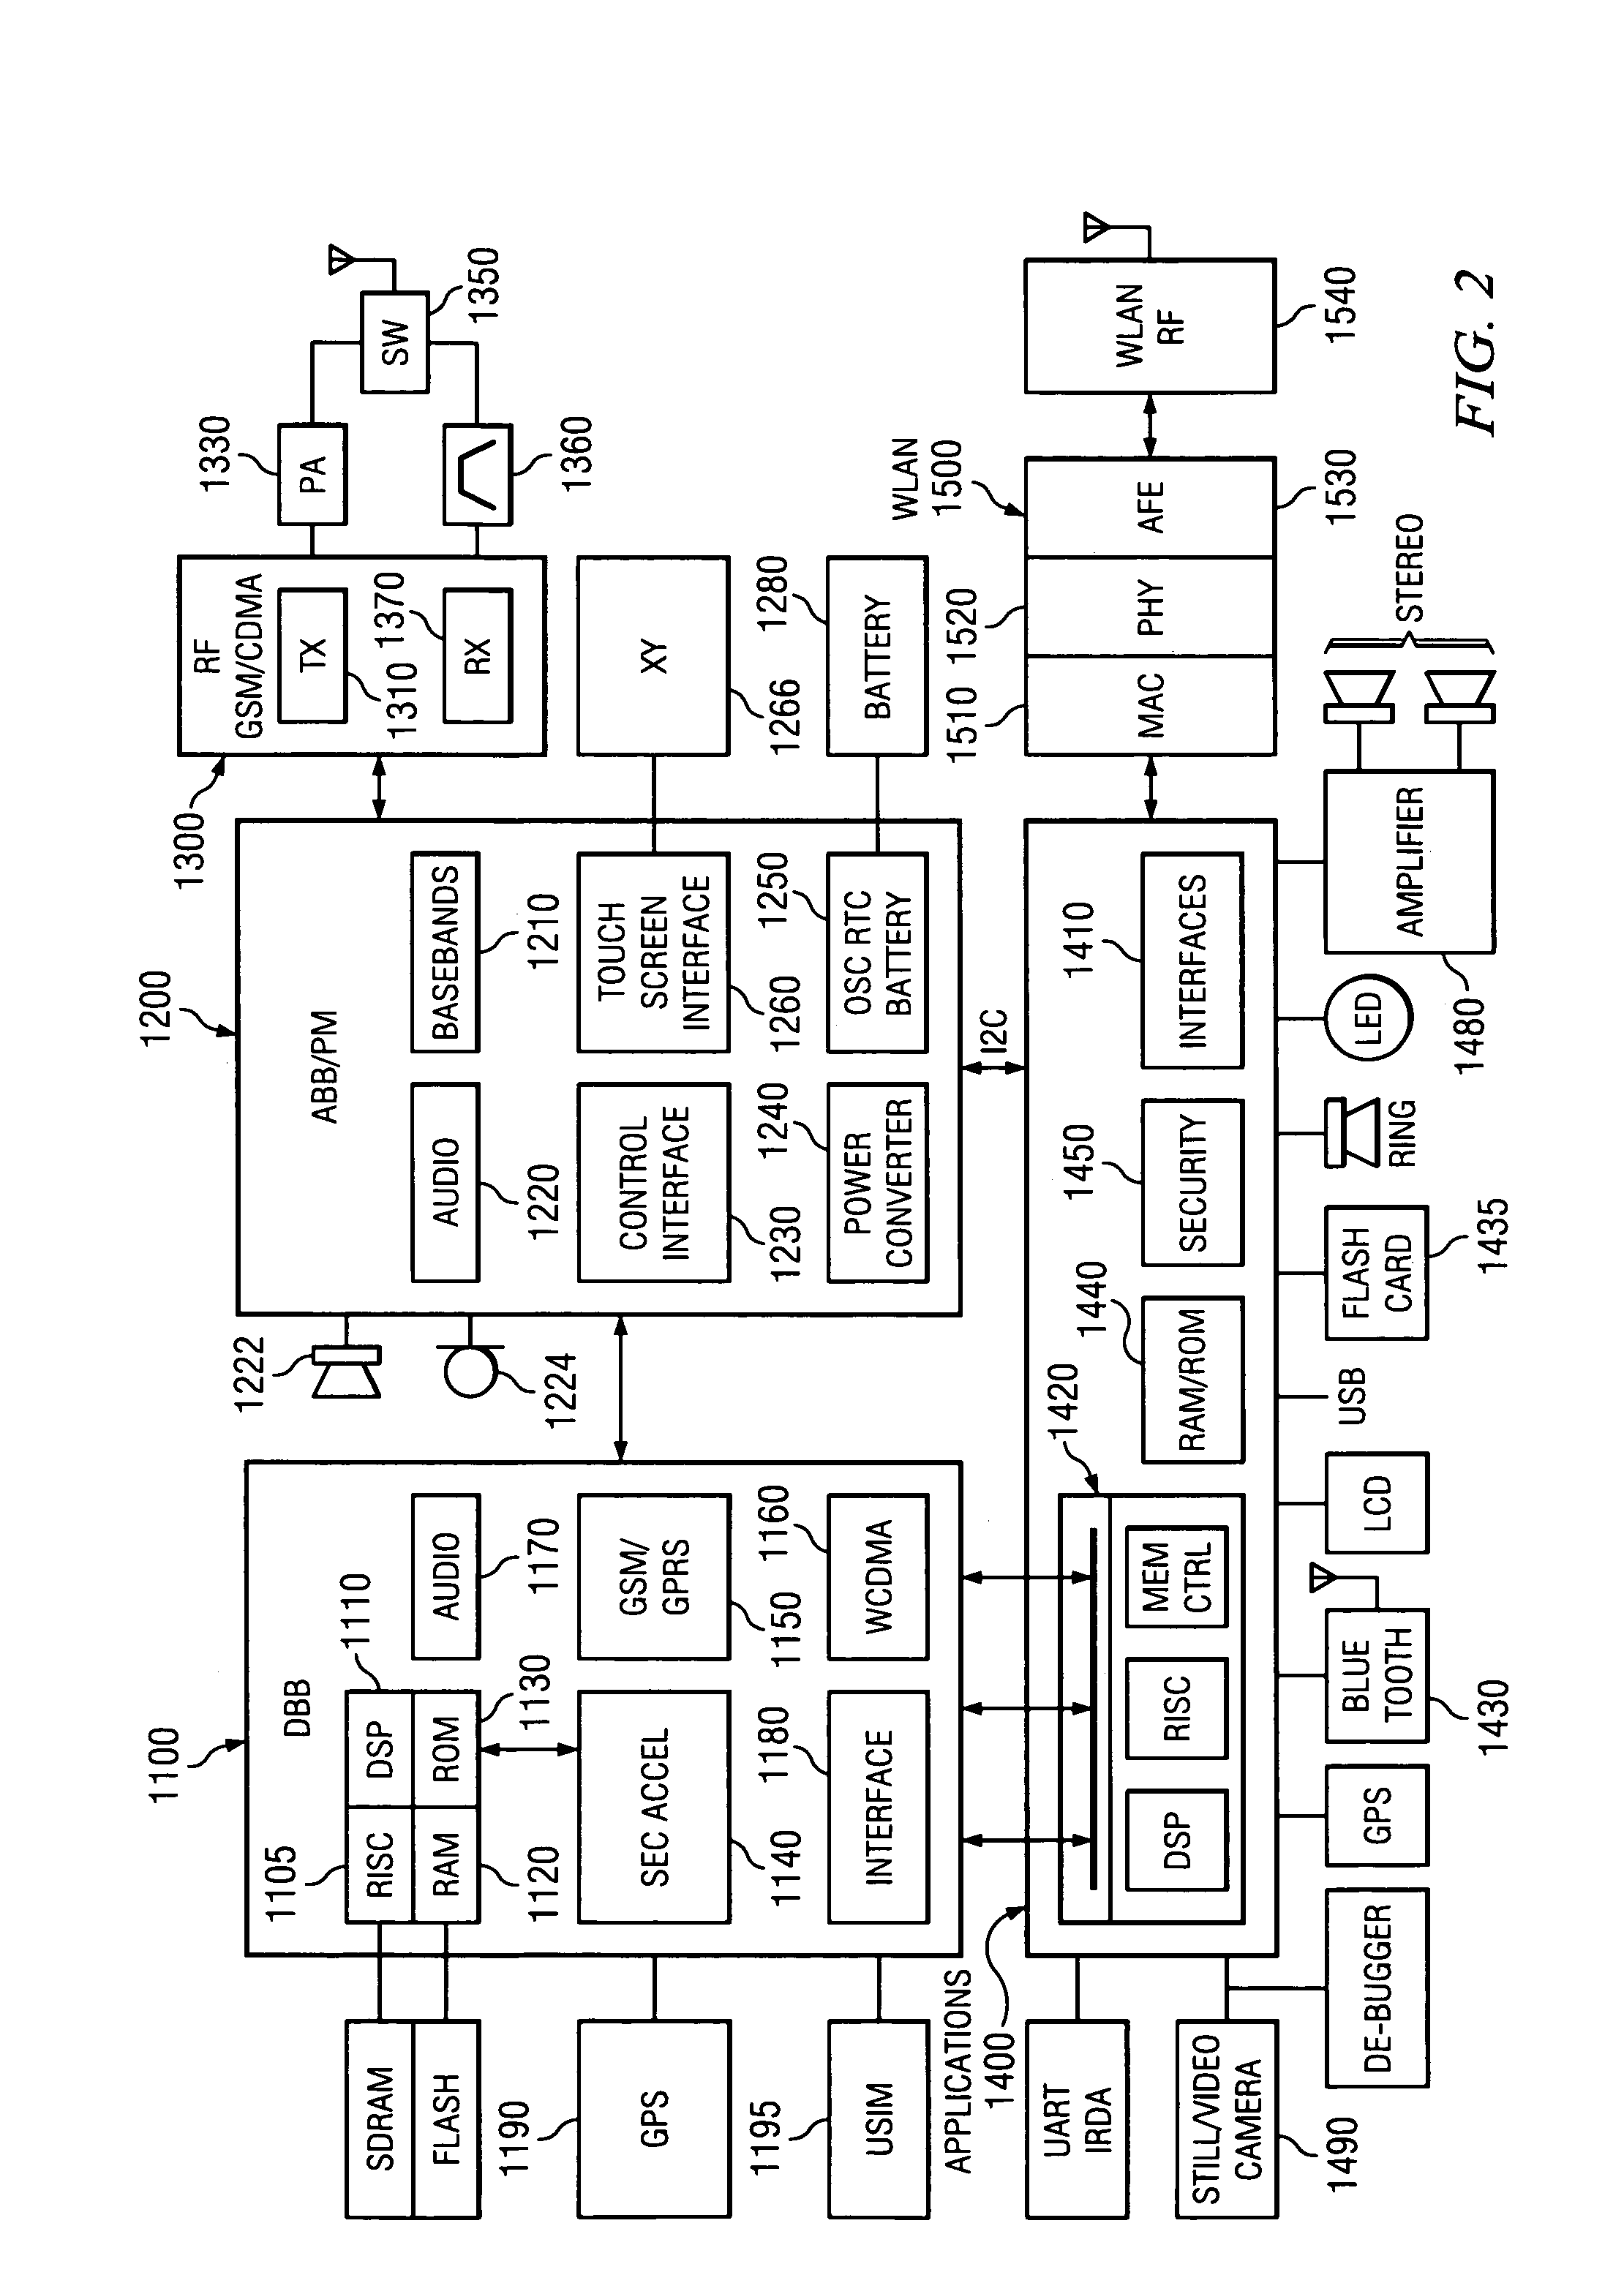 Branch prediction and other processor improvements using FIFO for bypassing certain processor pipeline stages